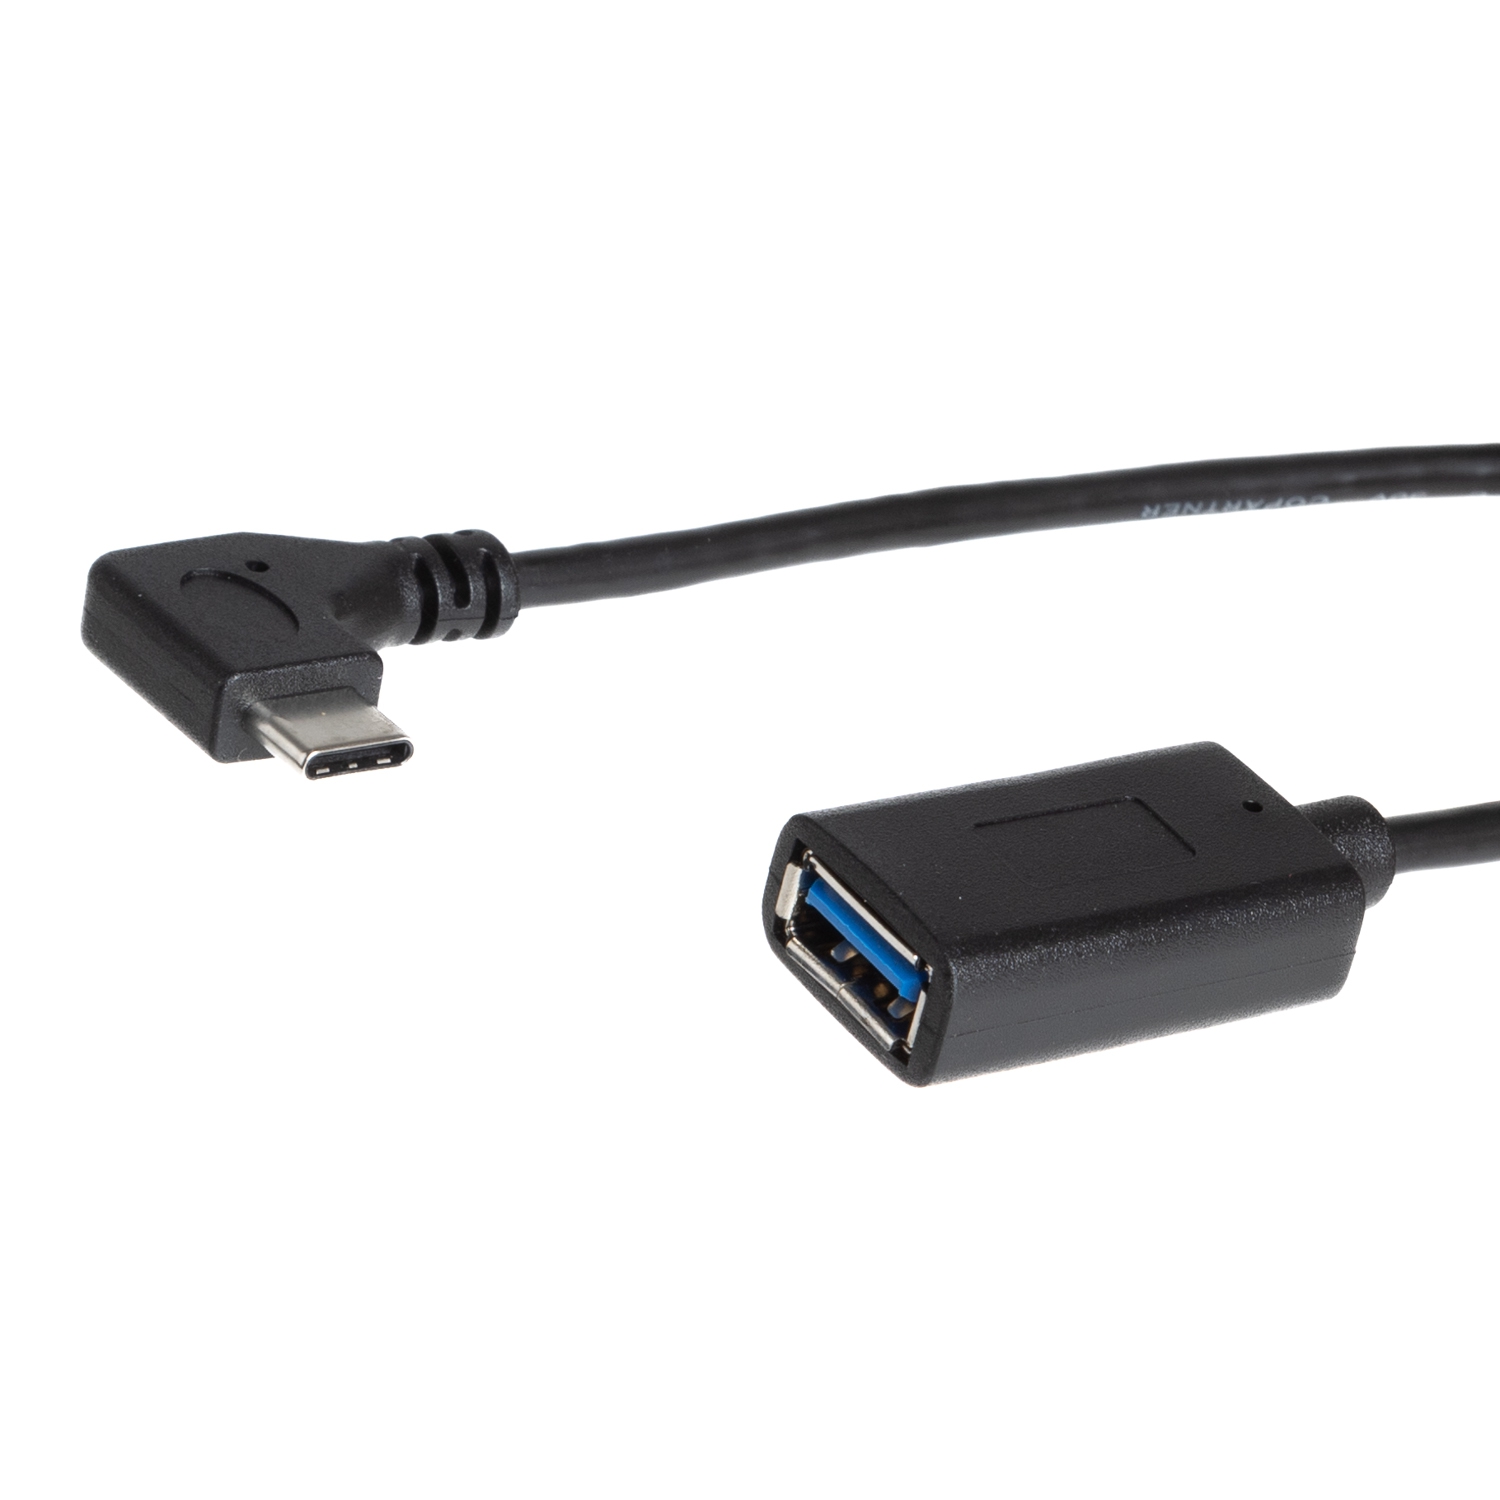 Cable USB 3.1 Type-C™ male angled to USB 3.0 A female 50cm